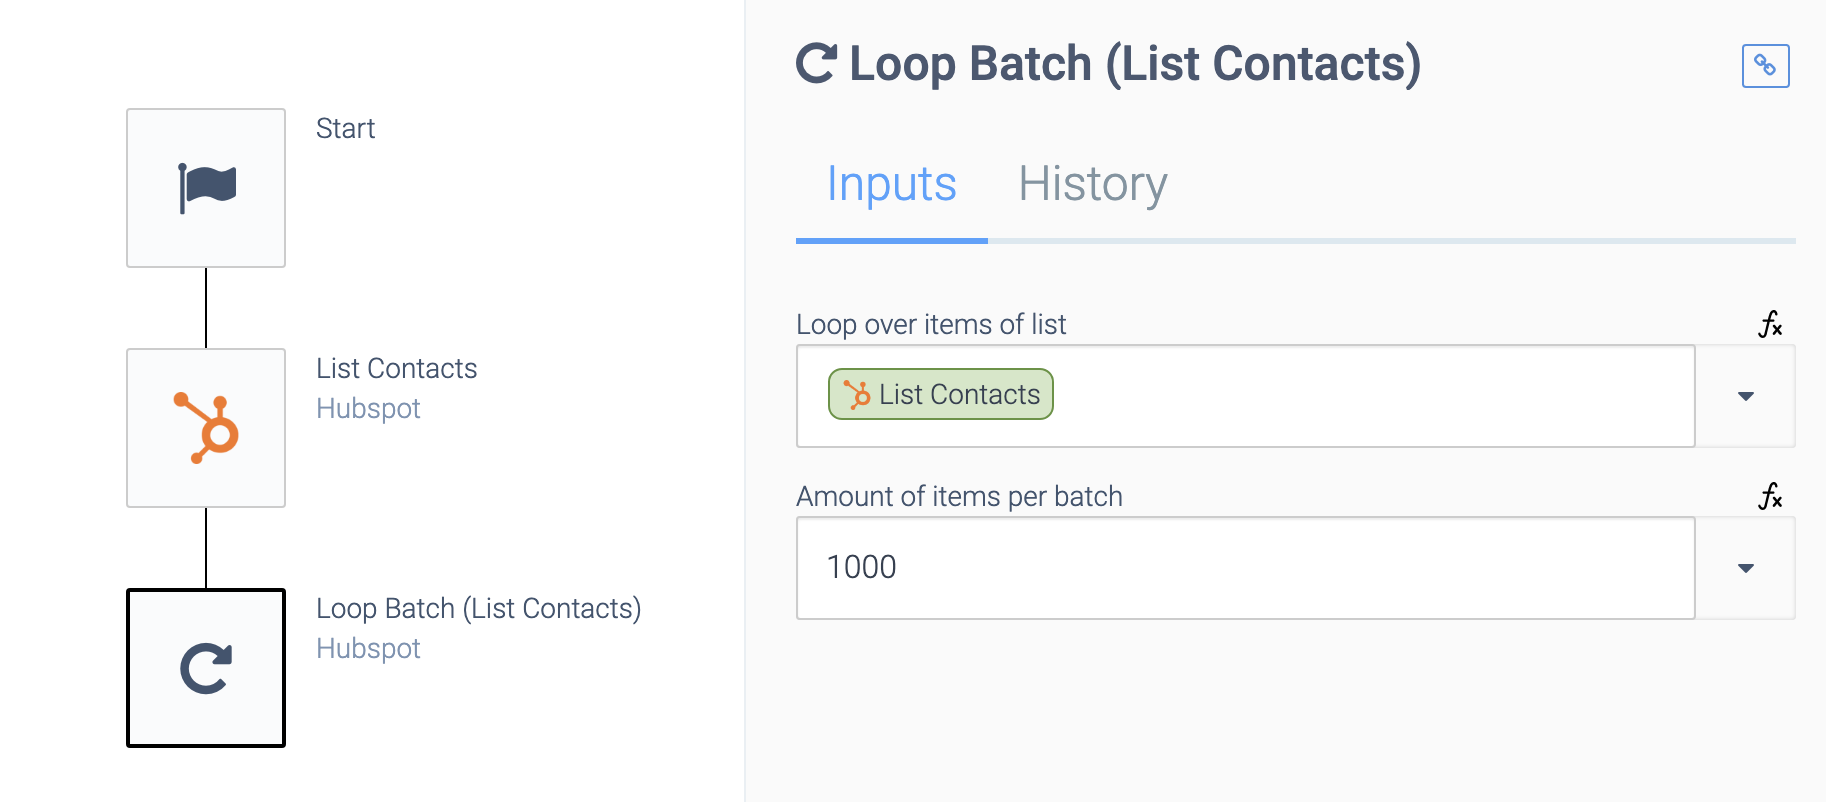 an automation consisting of a start block, a List Contacts block, and a Loop Batch block. The Loop Batch block is selected. Loop over items of list is set to List Contacts, and Amount of items per batch is set to 1000.